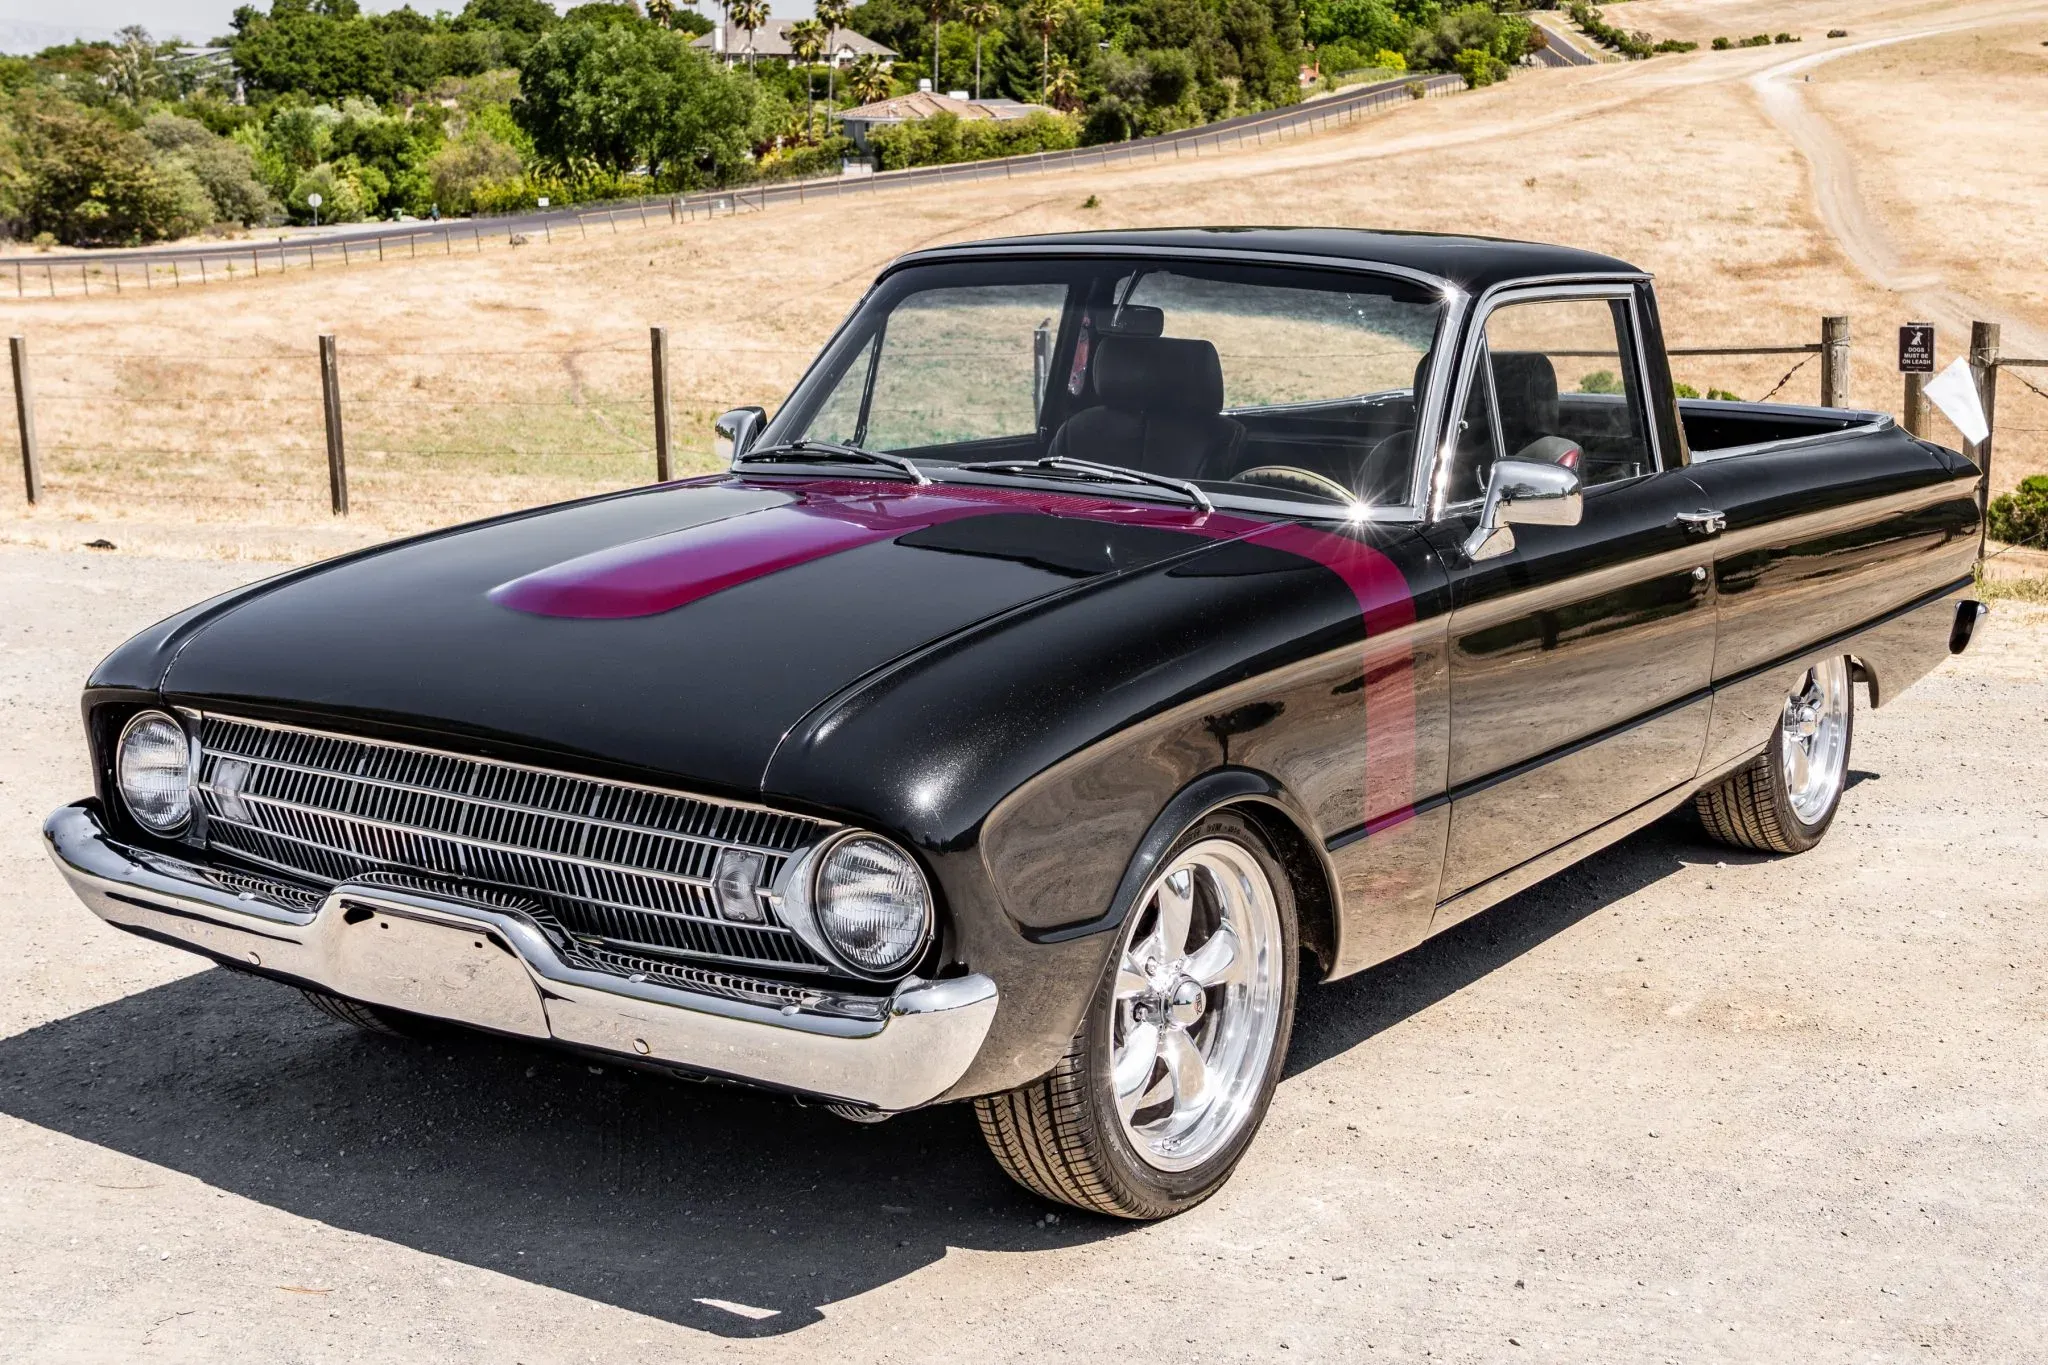 A parked modified 1960 Ford Ranchero